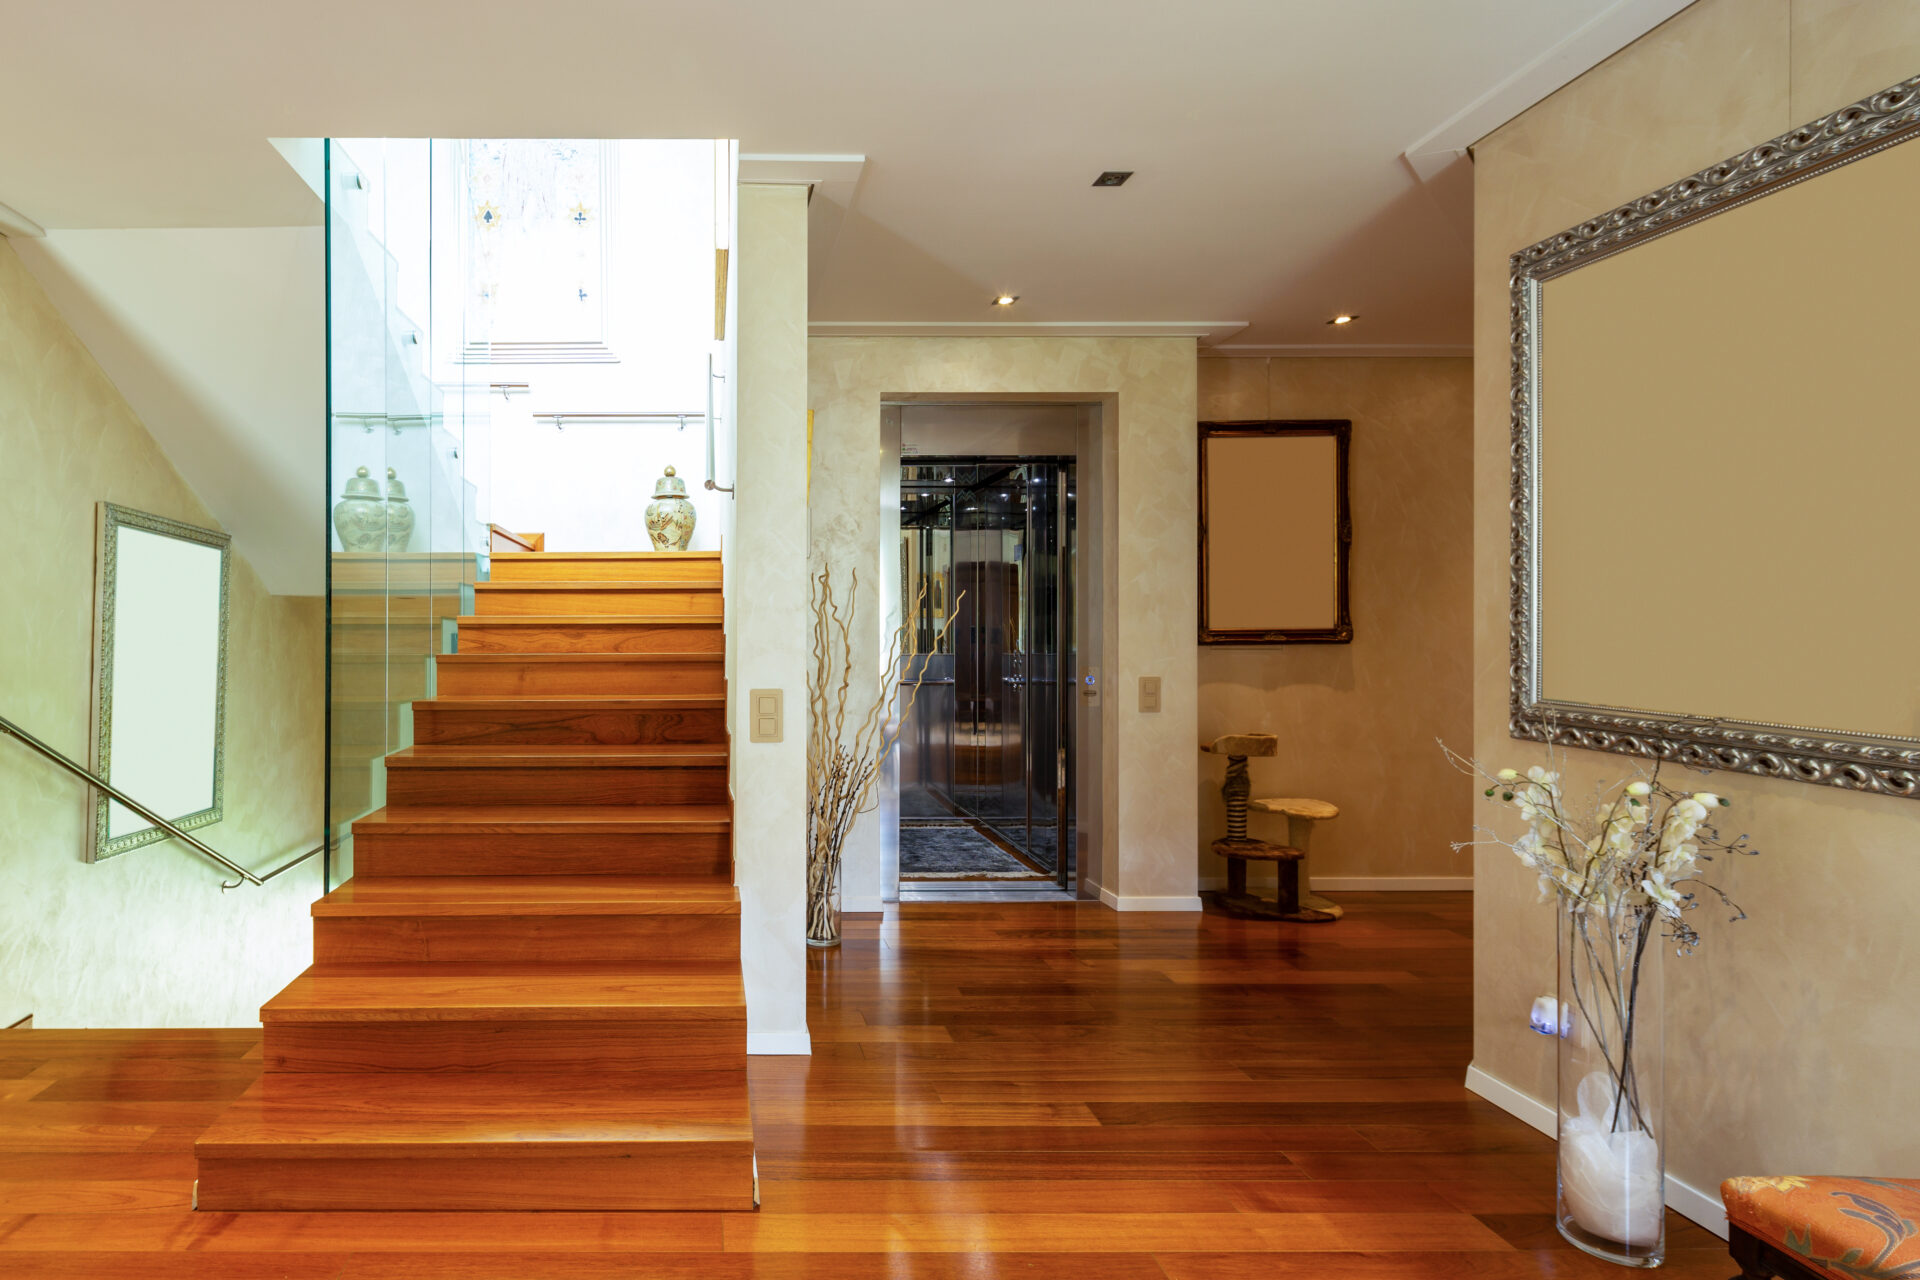 Entry with stairs and glass, parquet